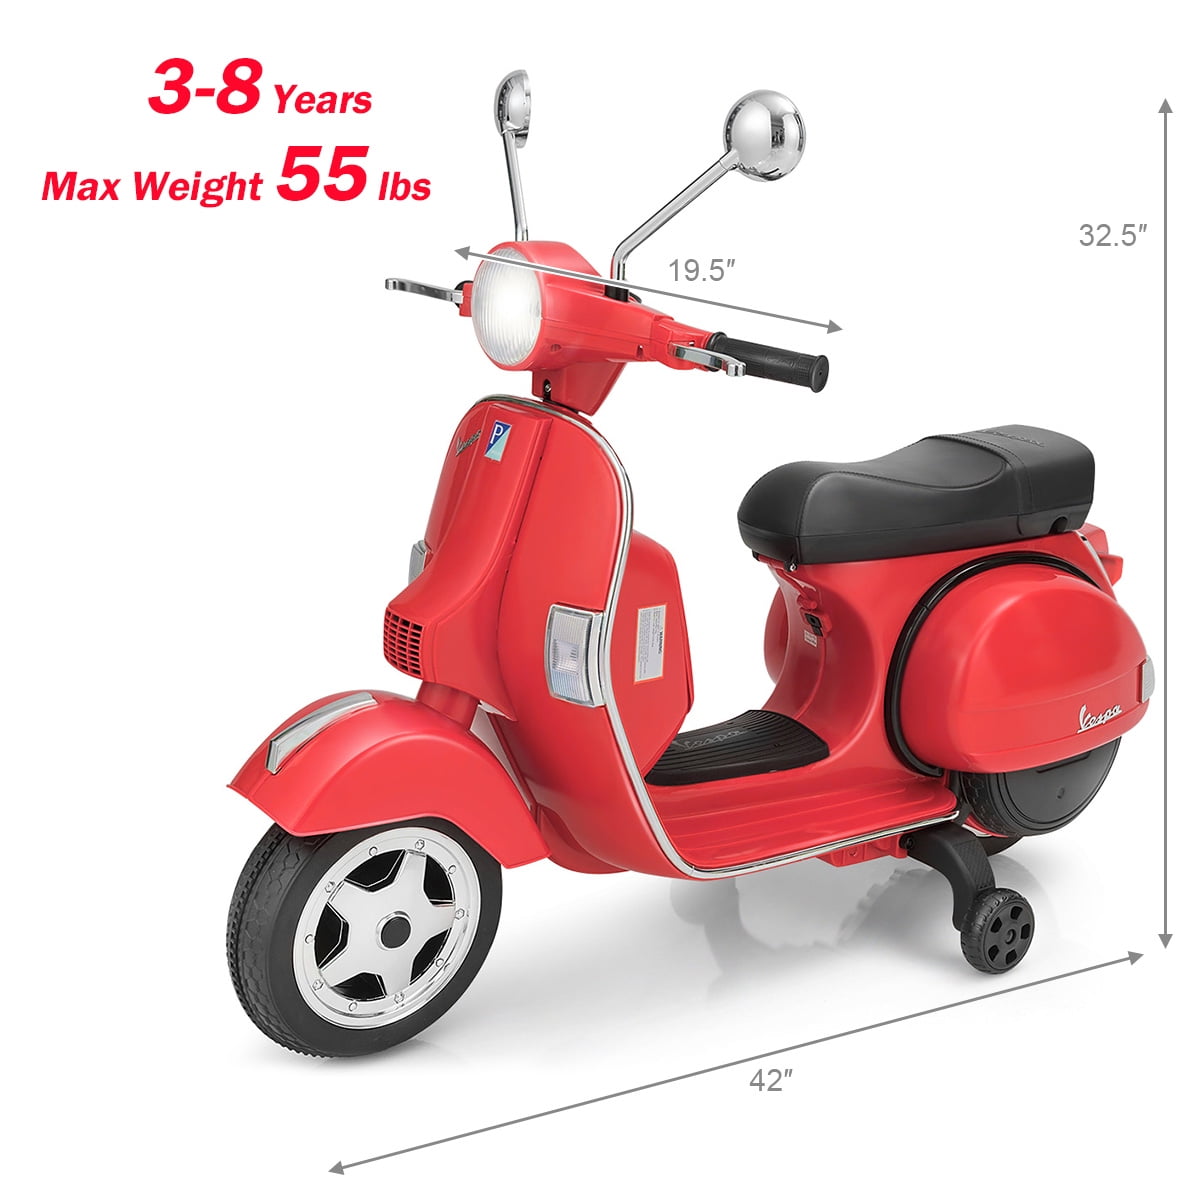 6V Rechargeable Ride on Motorcycle w/Training Wheels Gift for Children Boys Girls ASTM Certification Blue Costzon Kids Vespa Scooter Music Horn Lights Key Switch Forward/Reverse 